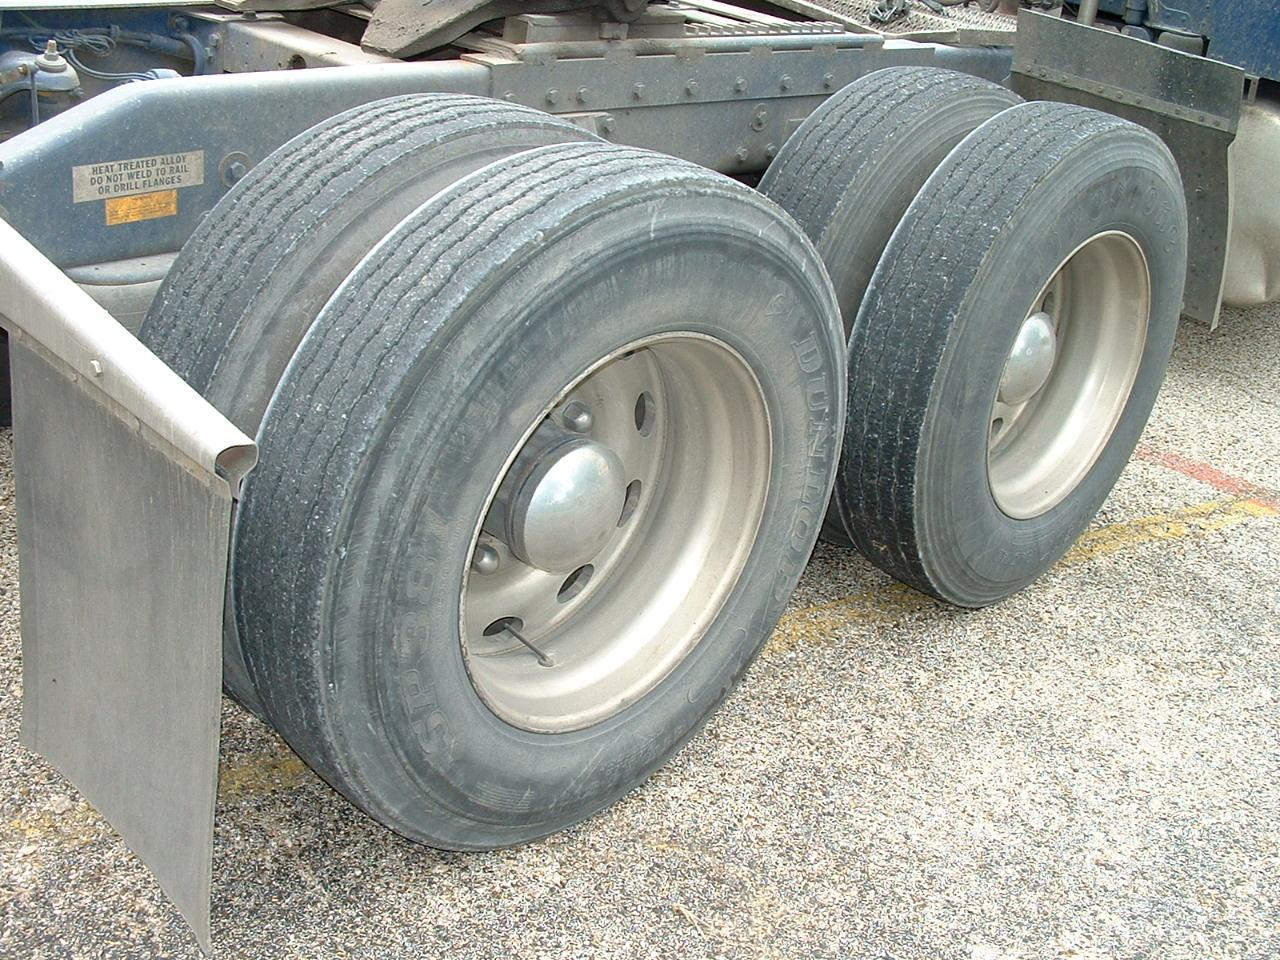 The semi-trailer tires and the tires on the rear of the semi-truck can be re-treads. Steer tires must be new.